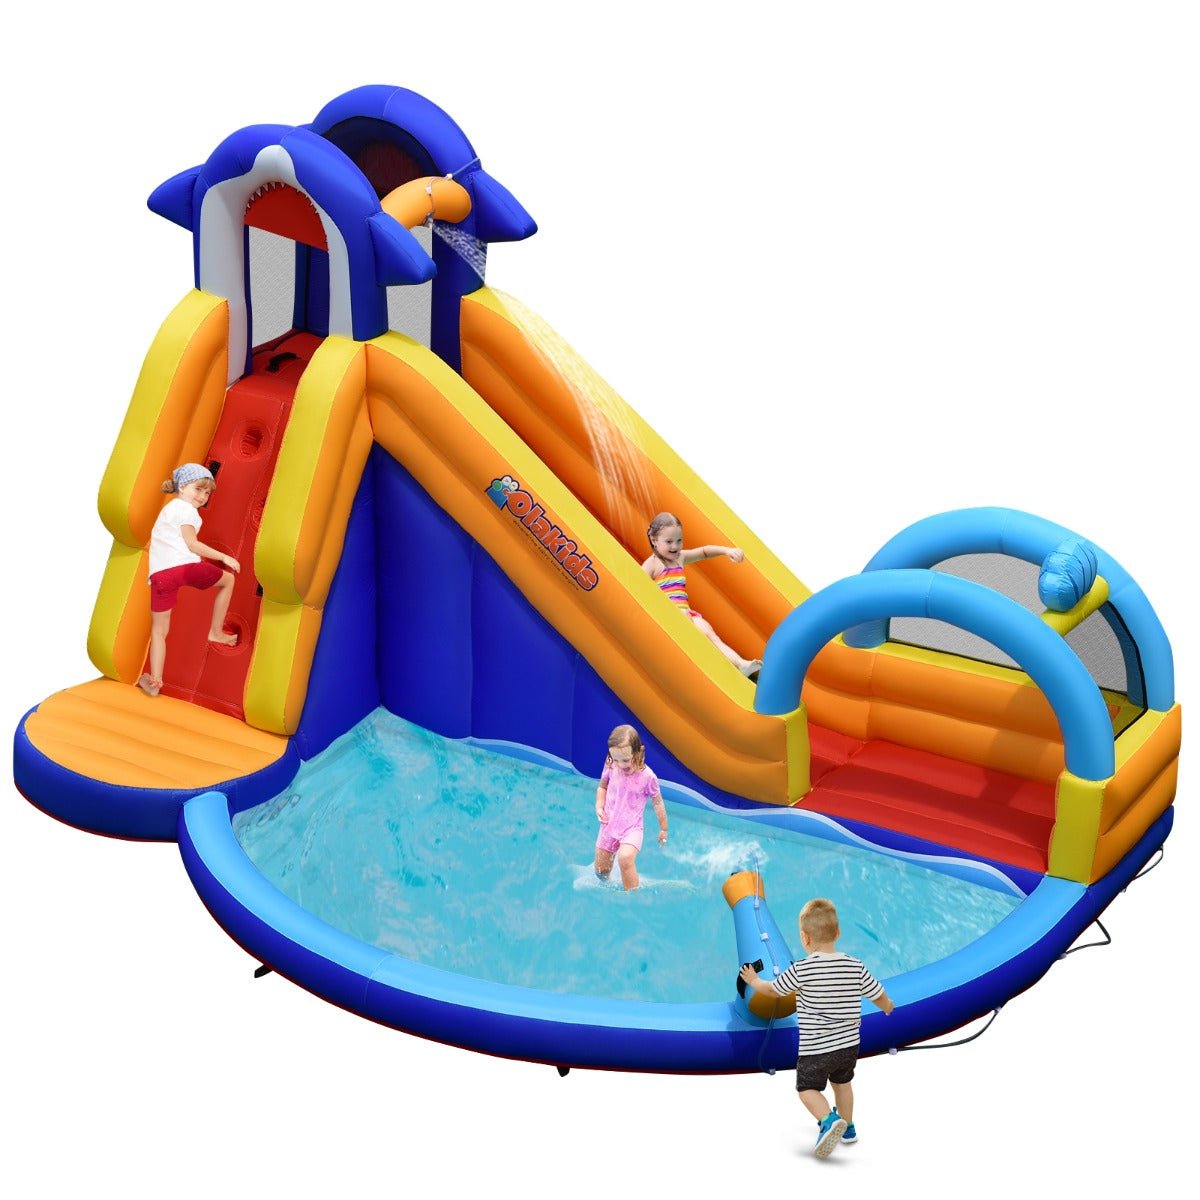 4-In-1 Water Bounce House with Basketball Rim - Active Play for Kids